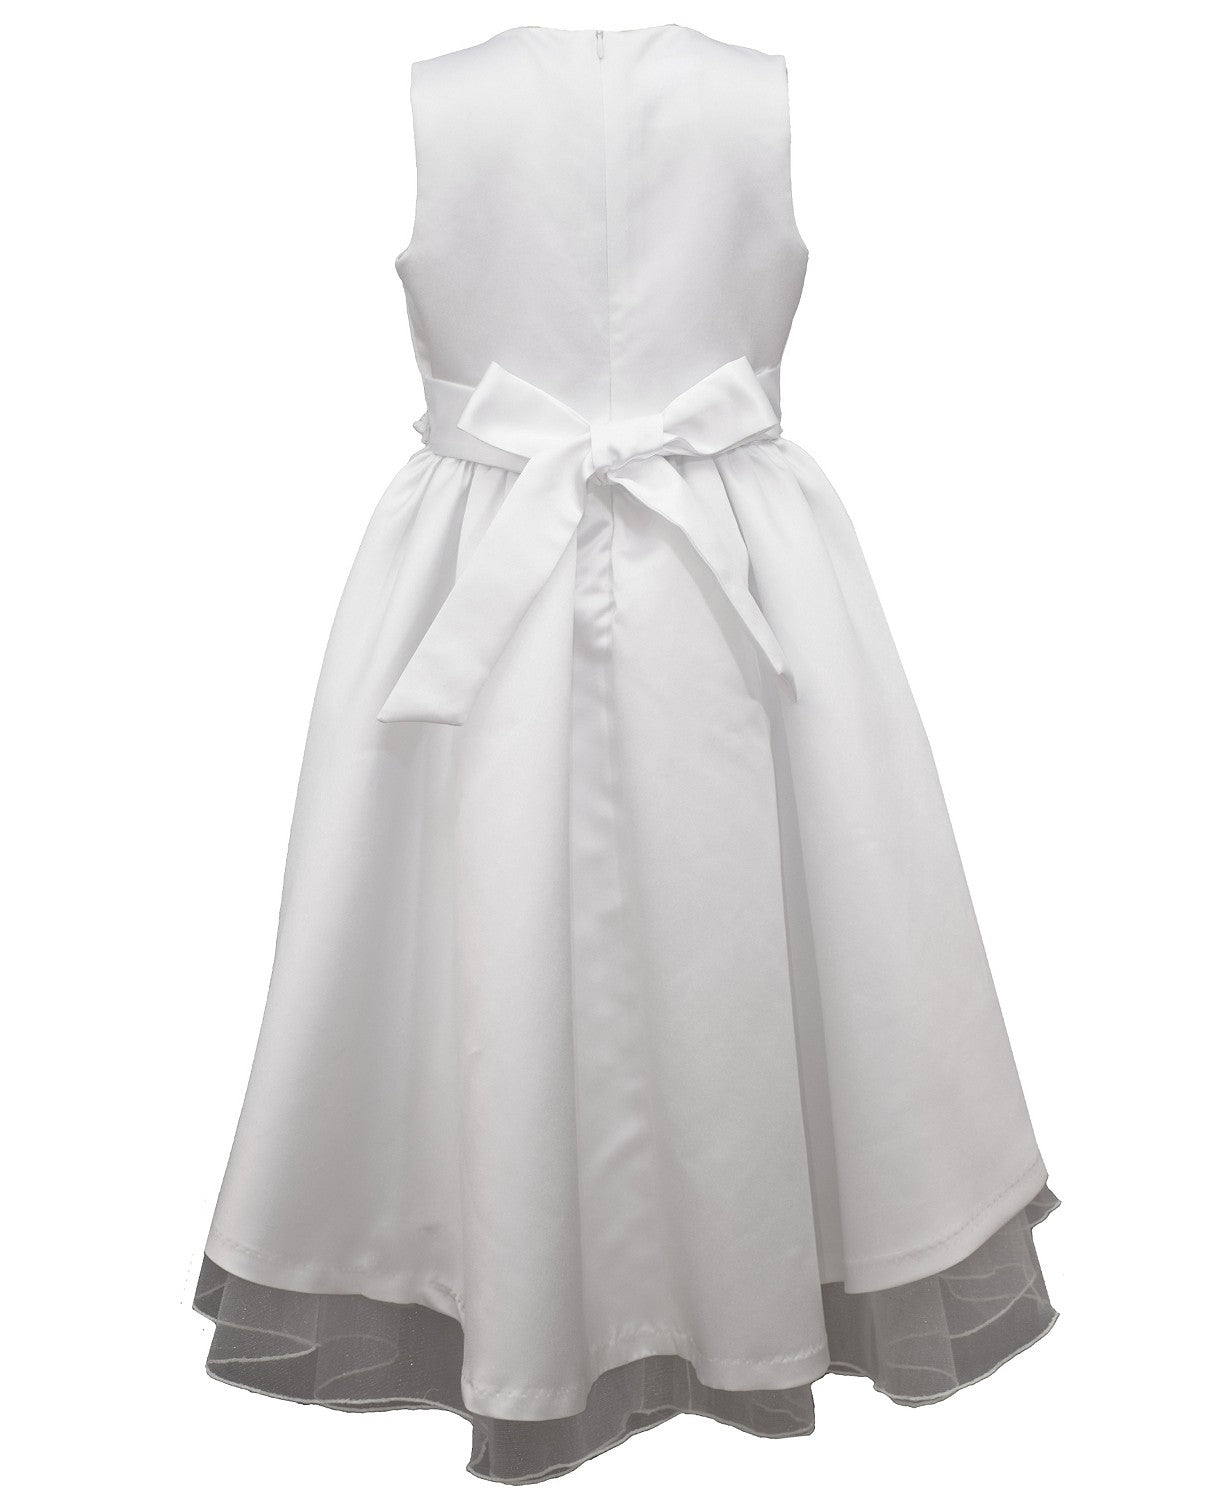 Pleated Front Dress Girls 7-12